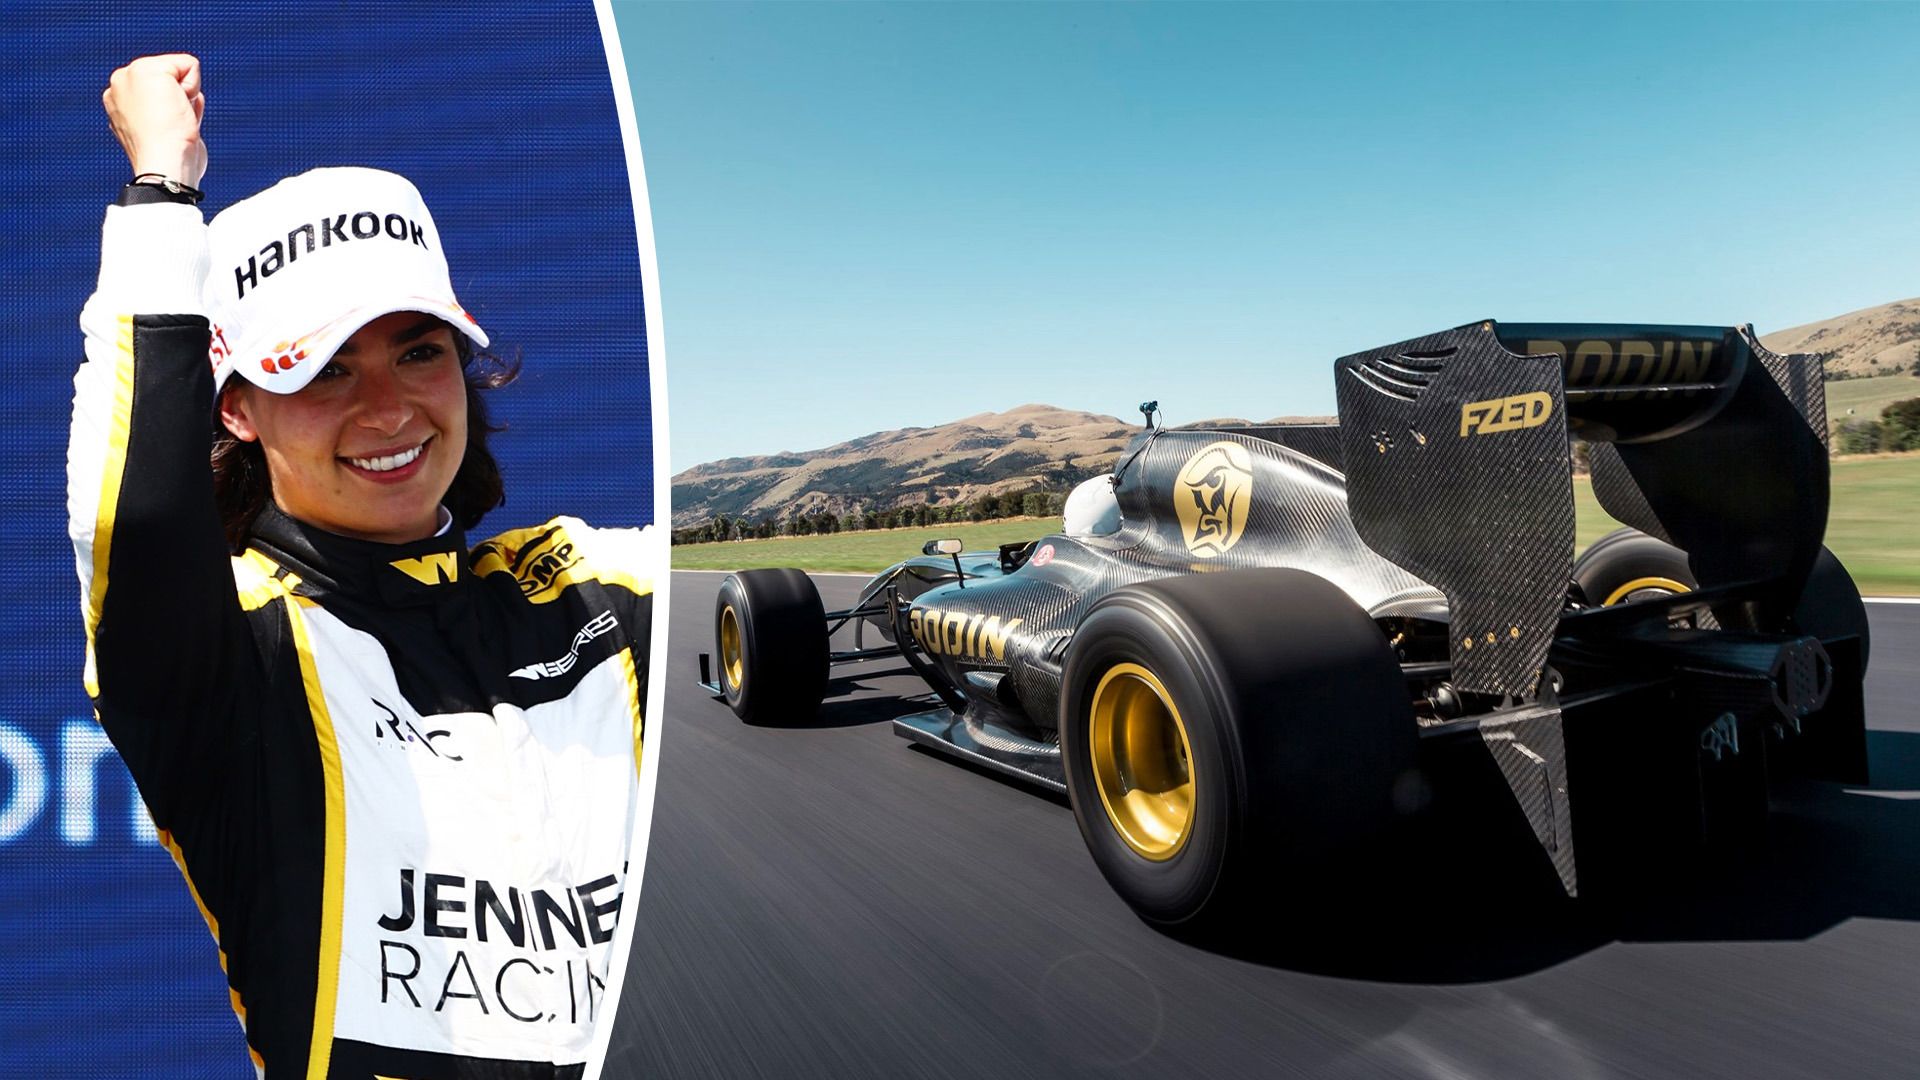 Jamie Chadwick is an outside chance at racing in F1.